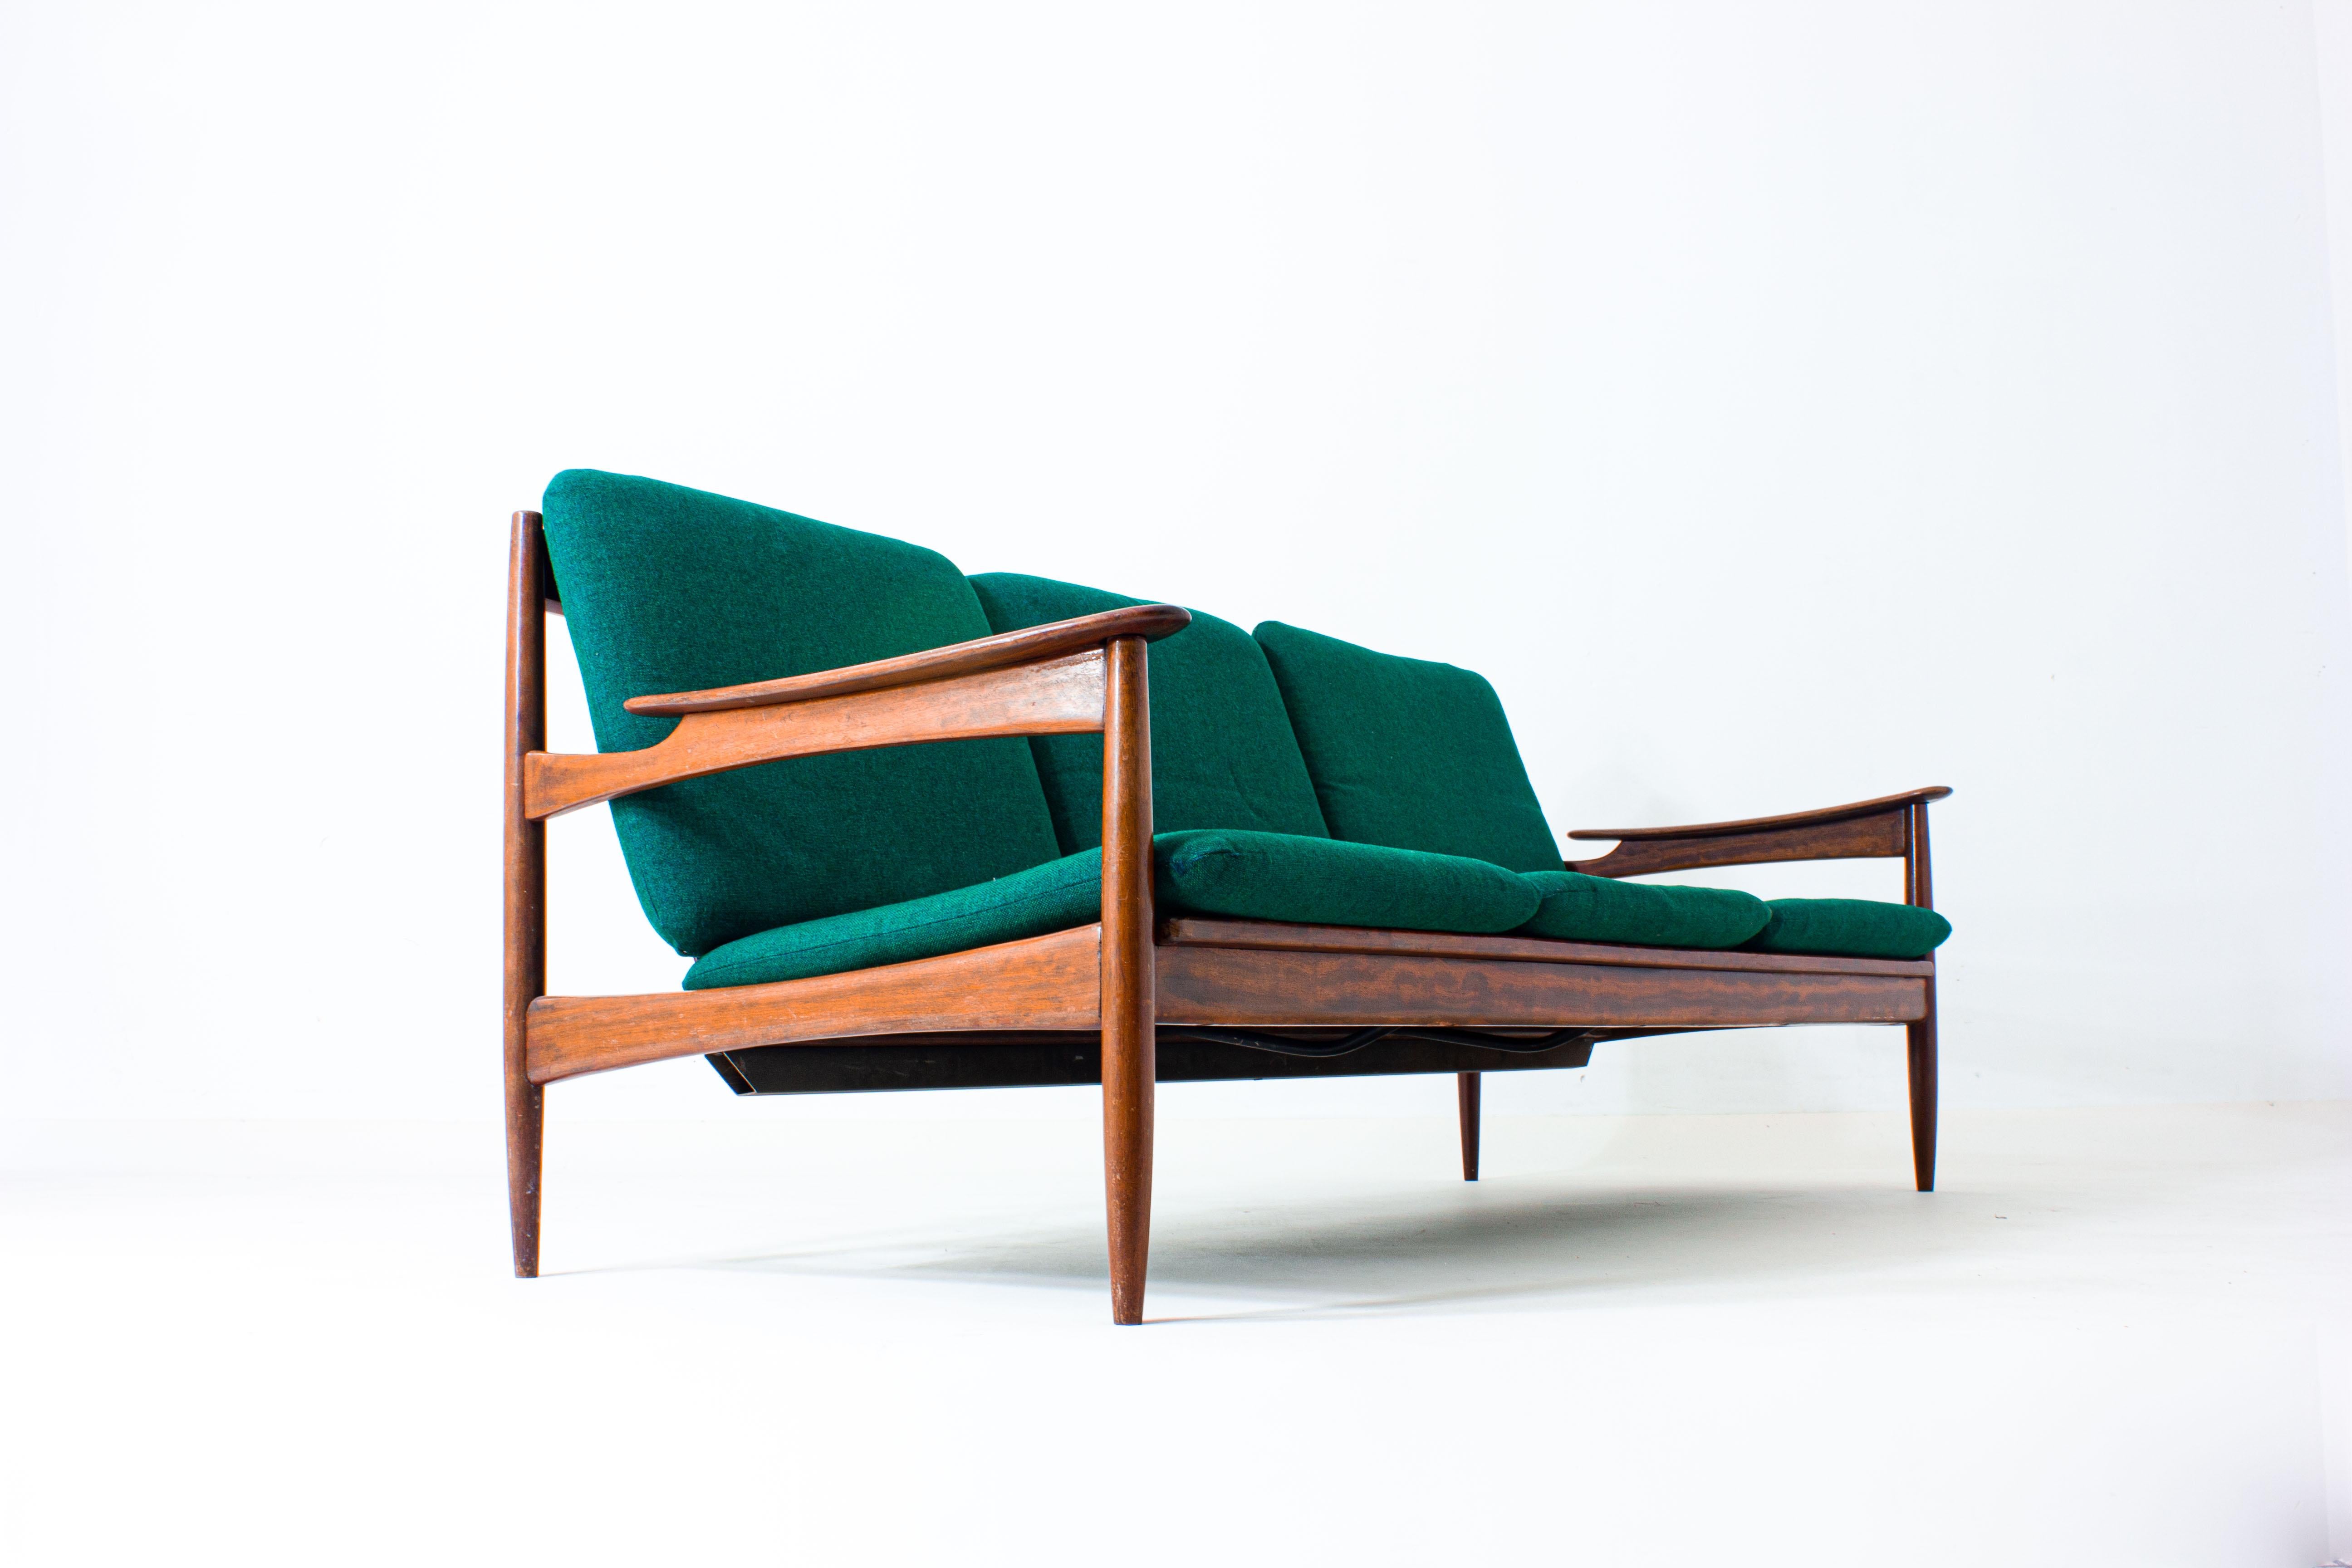 Mid-20th Century Rosewood 3-Seater Sofa in Emerald Green Upholstery, Denmark, 1960s